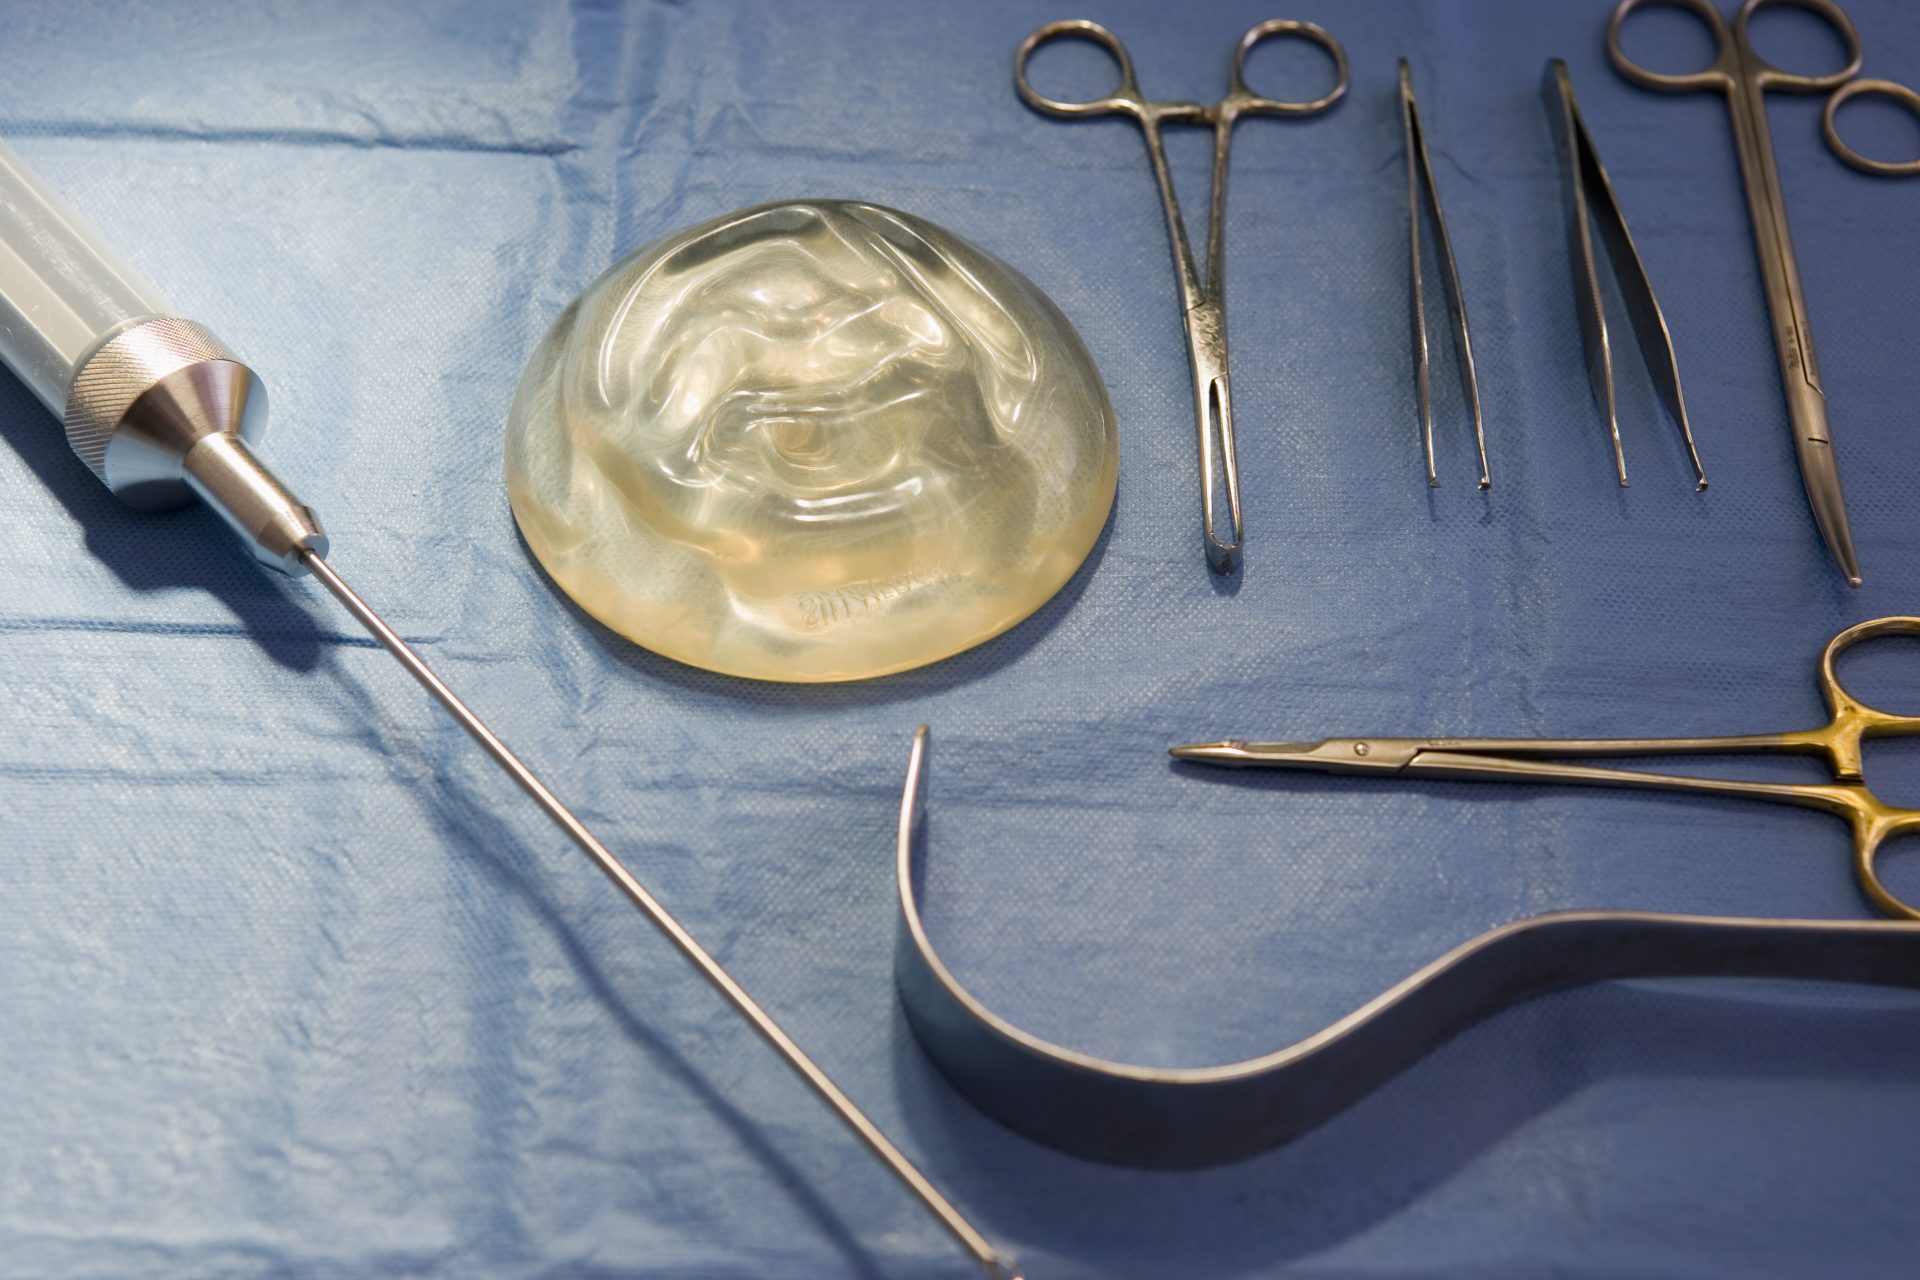 Woman Left With 'Uniboob' After Botched Surgery (Video) - Shy Magazine